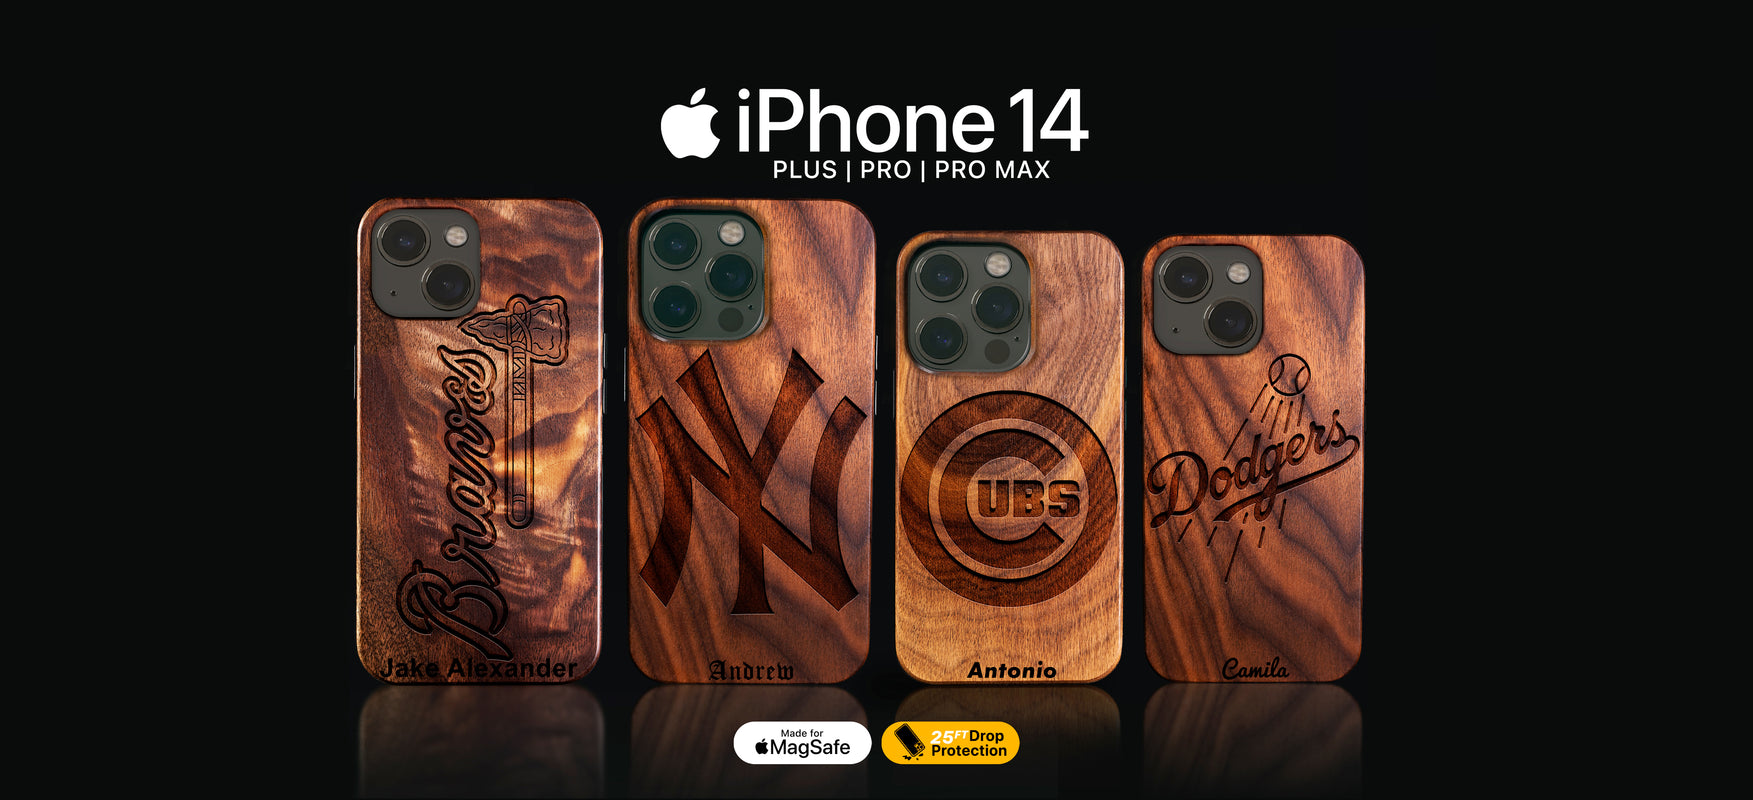 Custom St Louis Cardinals AirPods Cases | AirPods | AirPods Pro - Carved  Wood Cardinals AirPods Cover